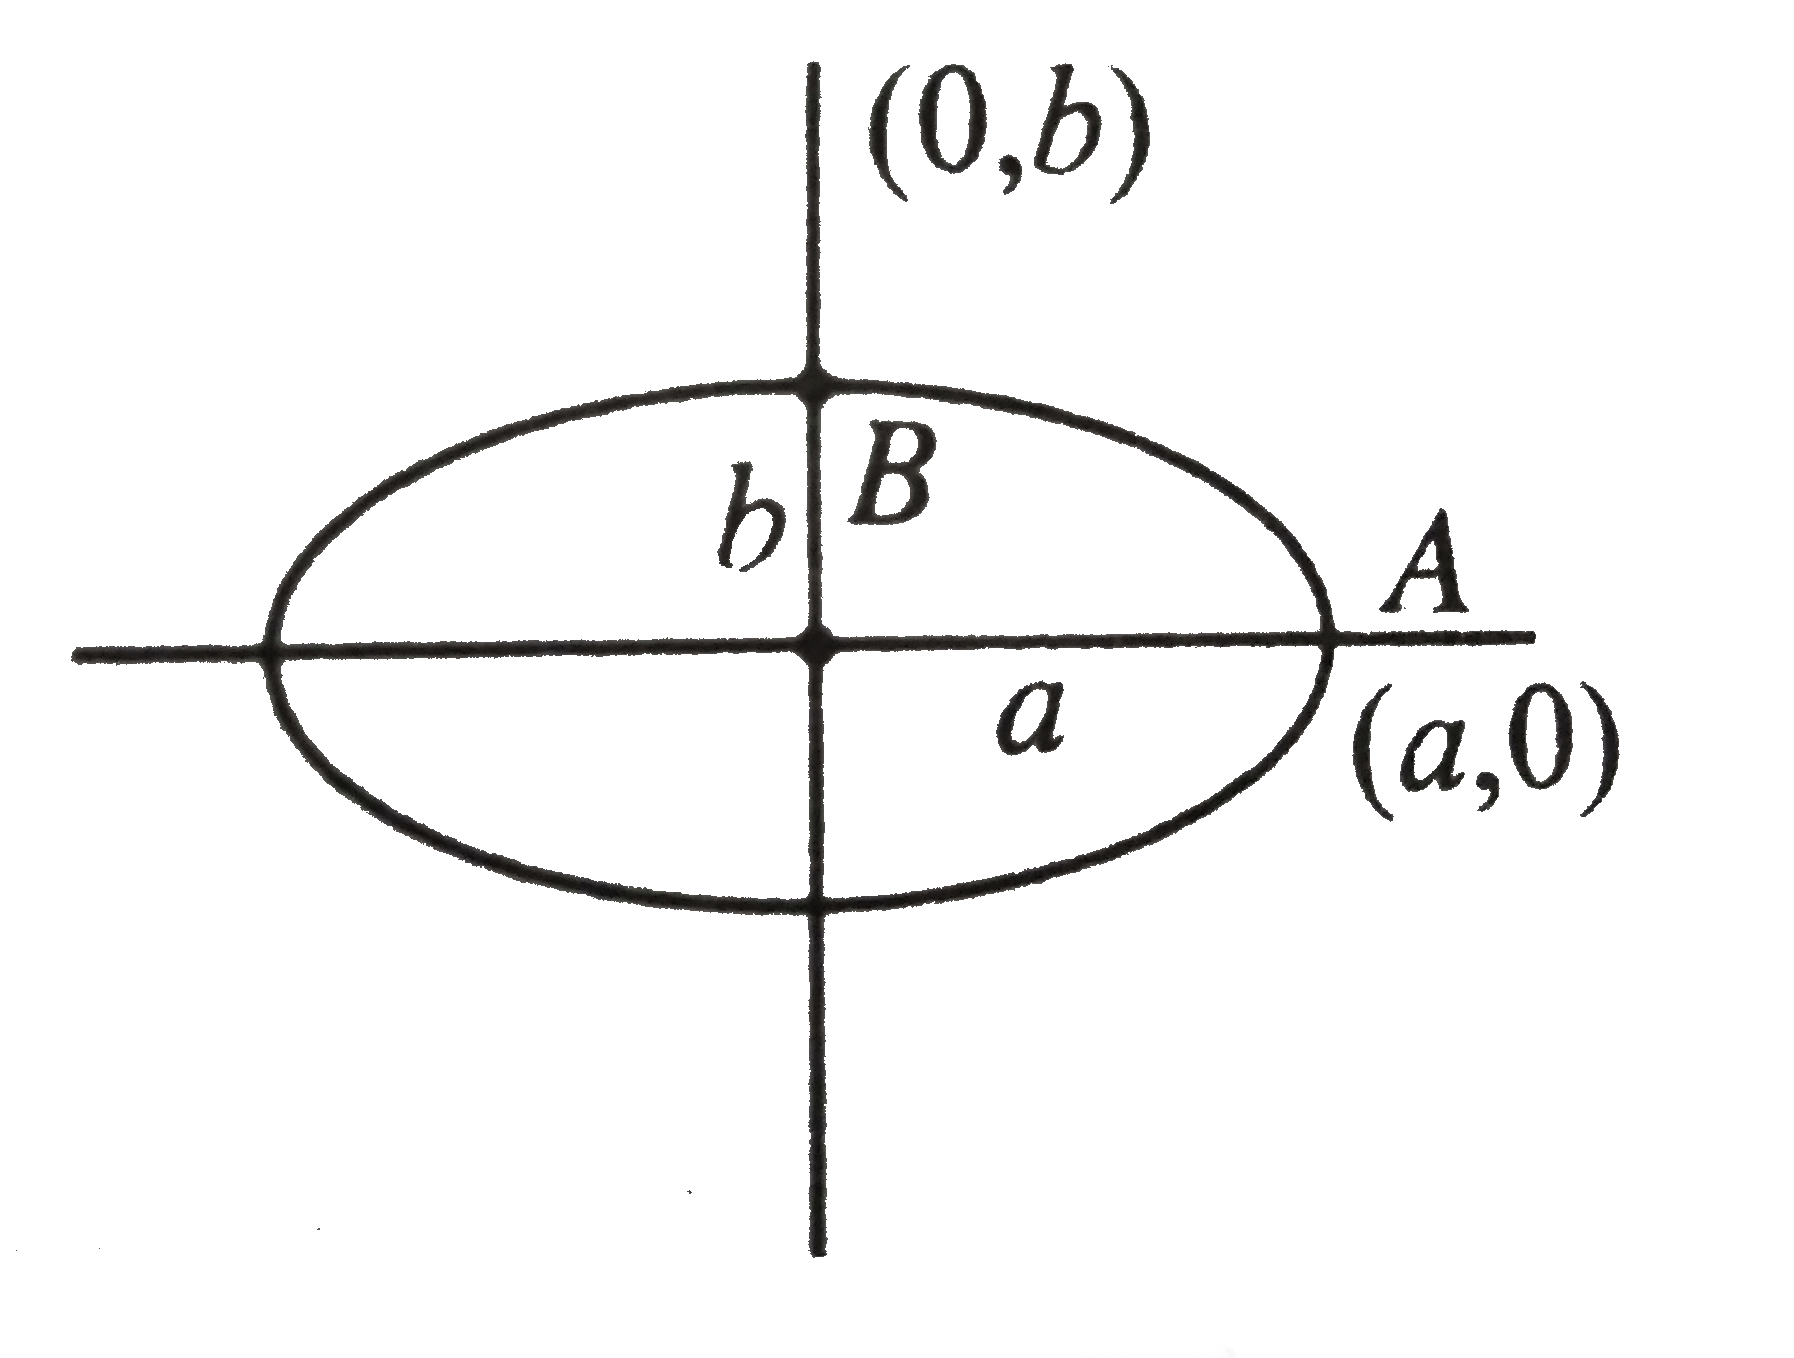 The Coordinate Of A Particle Moving In A Plane Are Given By X T A Cos Pt And Y T B Sin Pt Where A B Lt A And P Are Positive Constants